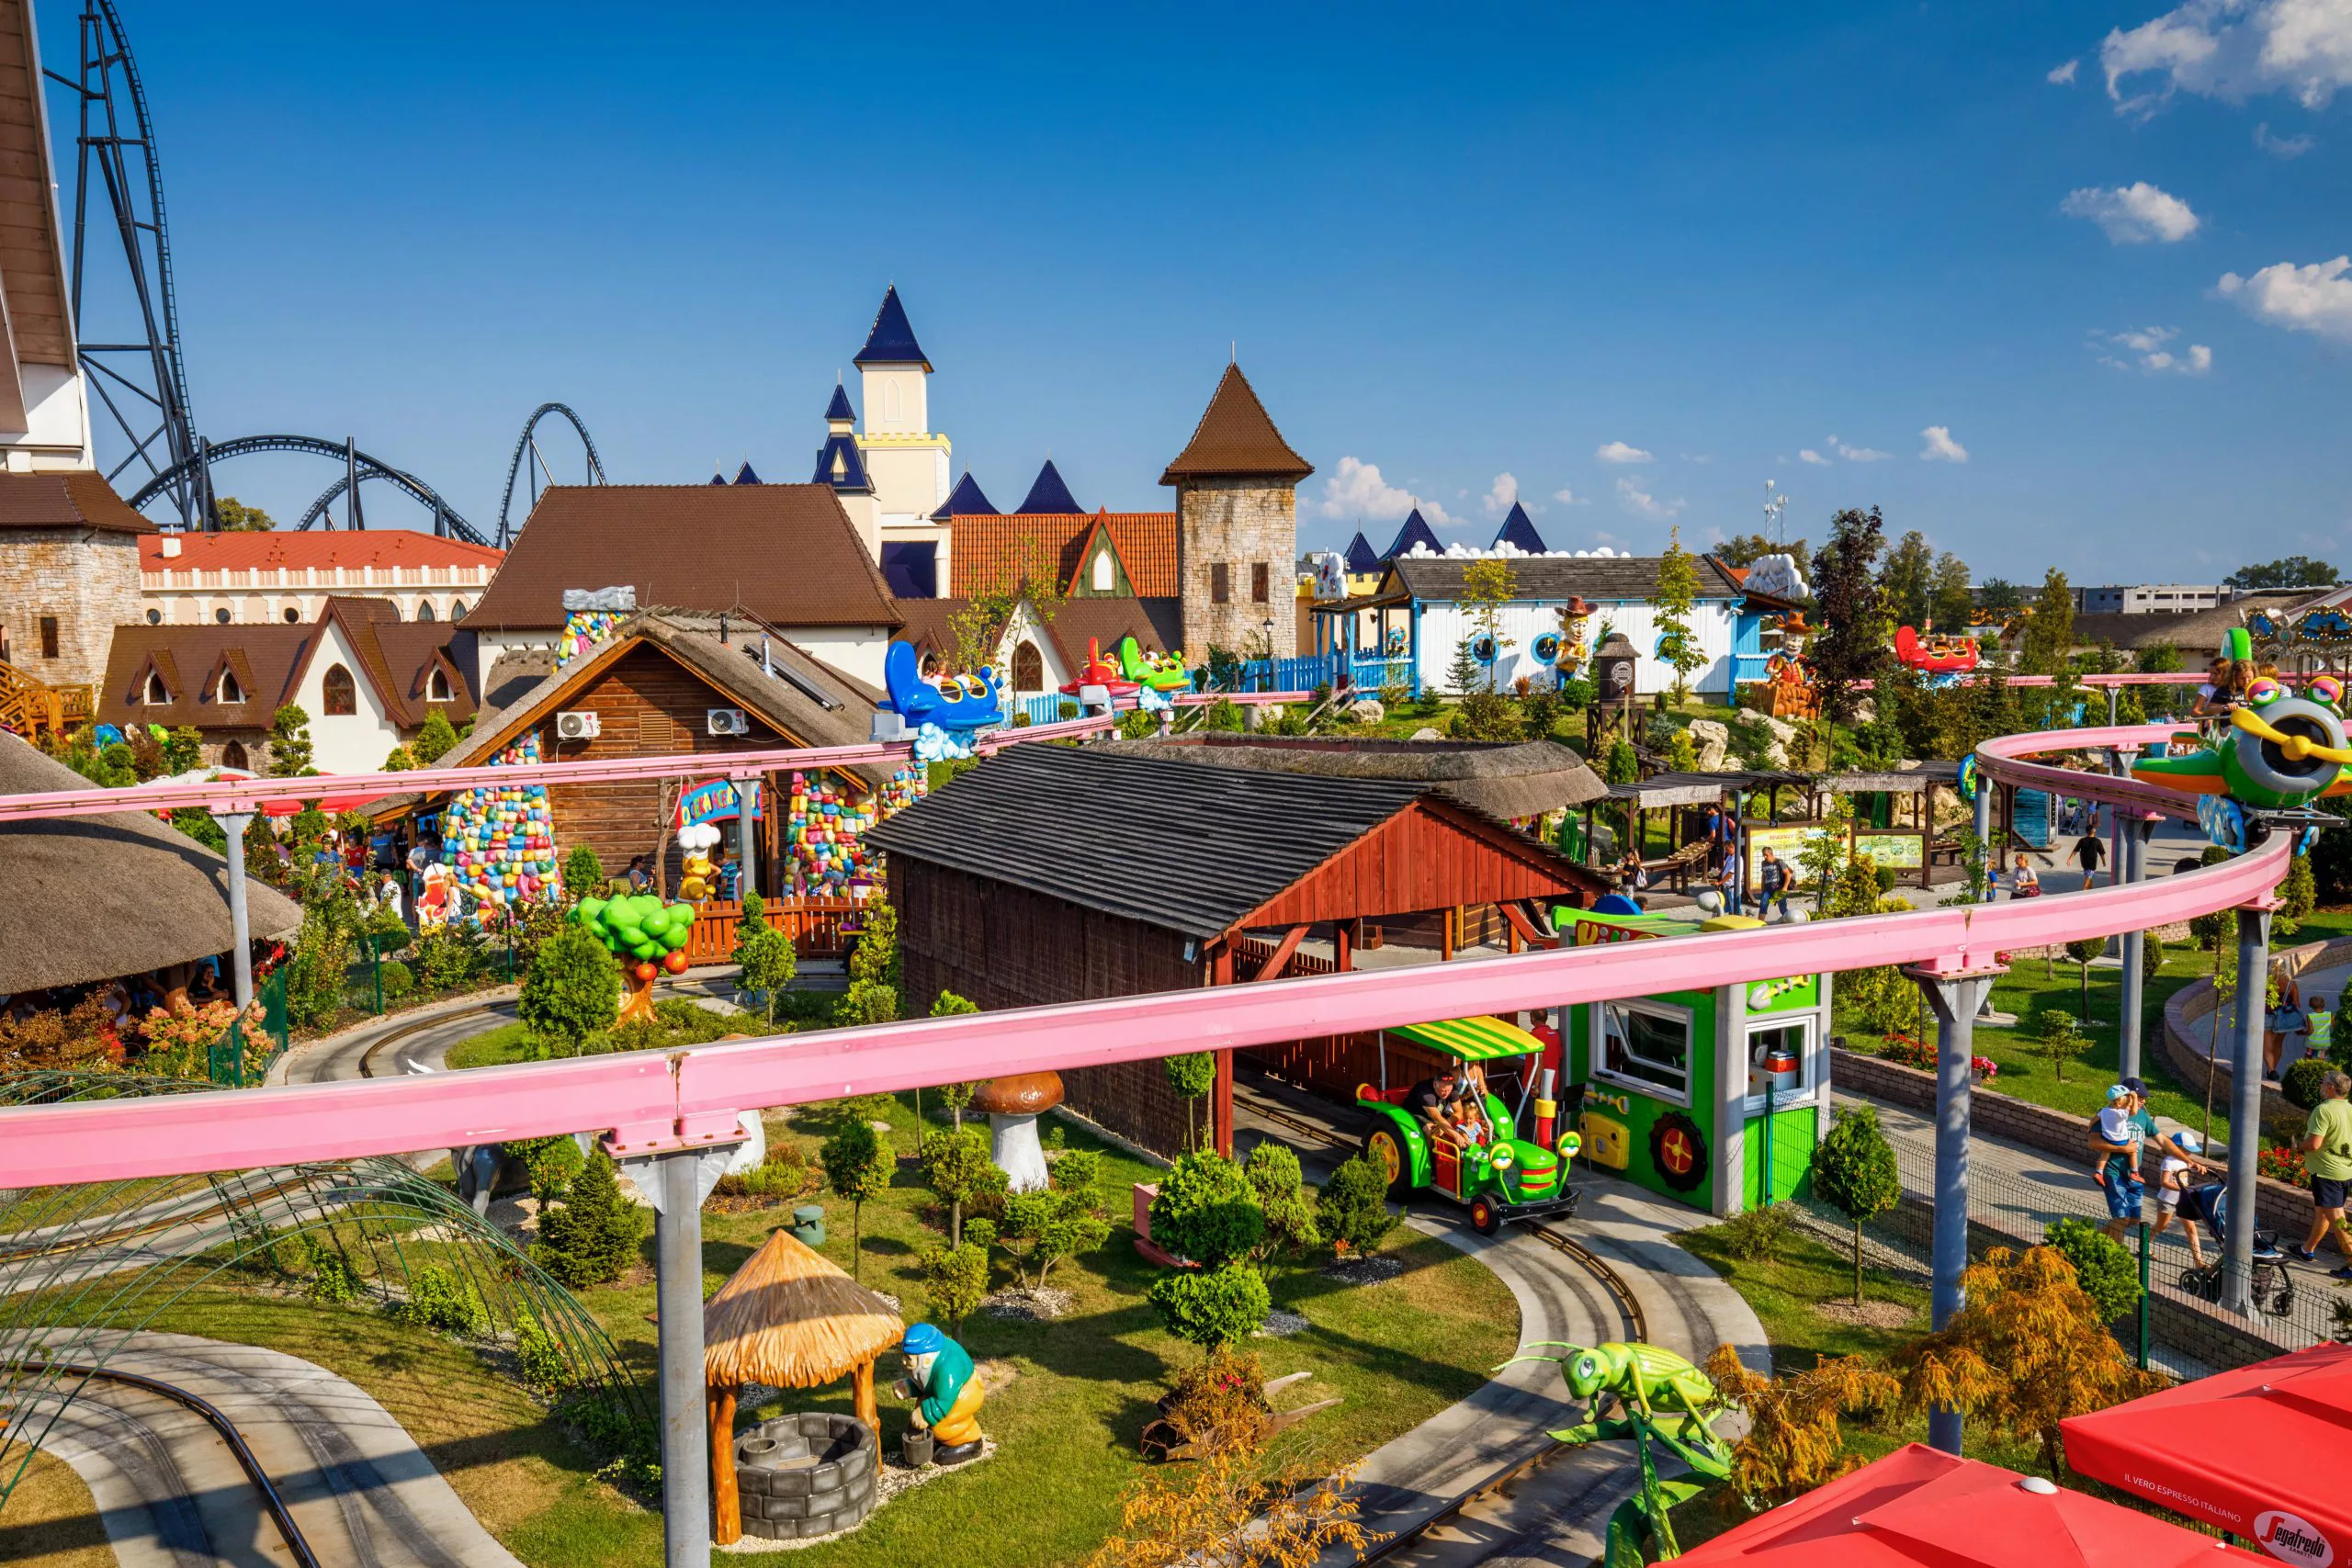 Colourful attractions under a pink monorail in an amusement park include green tractors on a track among other colourful attractions, with a mockup of a medical city and rollercoasters tracks behind.